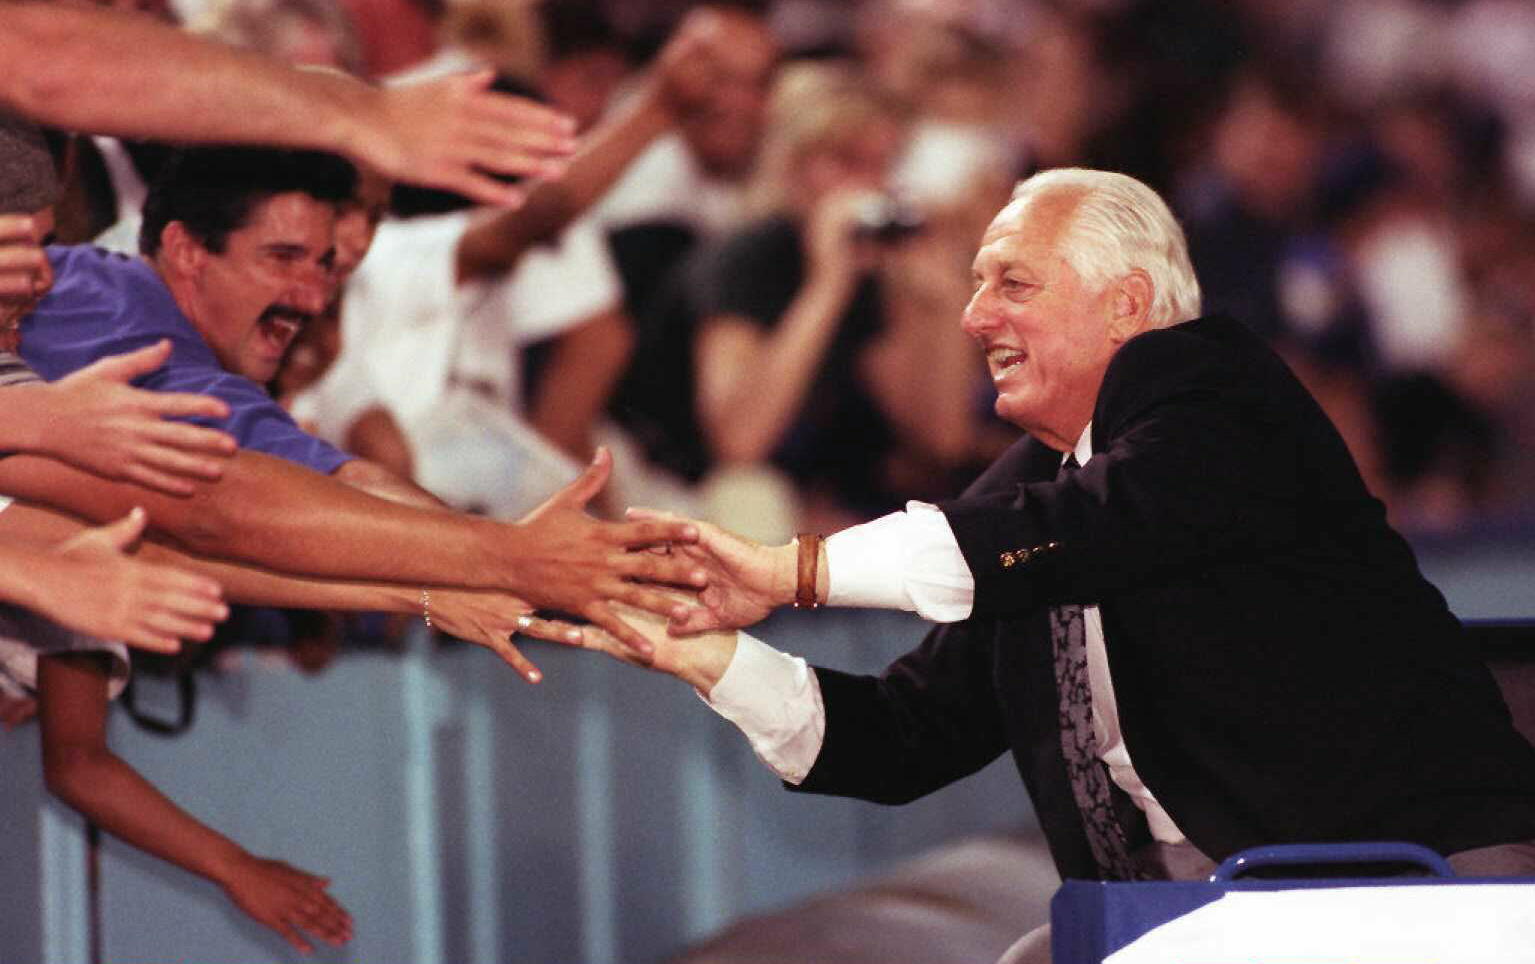 LOS ANGELES, UNITED STATES:  Former Los Angeles Dodger head coach Tommy Lasorda slaps fans hands as he rides around the field 07 September at Dodger Stadium.  Lasorda was honored by past and present players, coaches, writers and community members in a cer